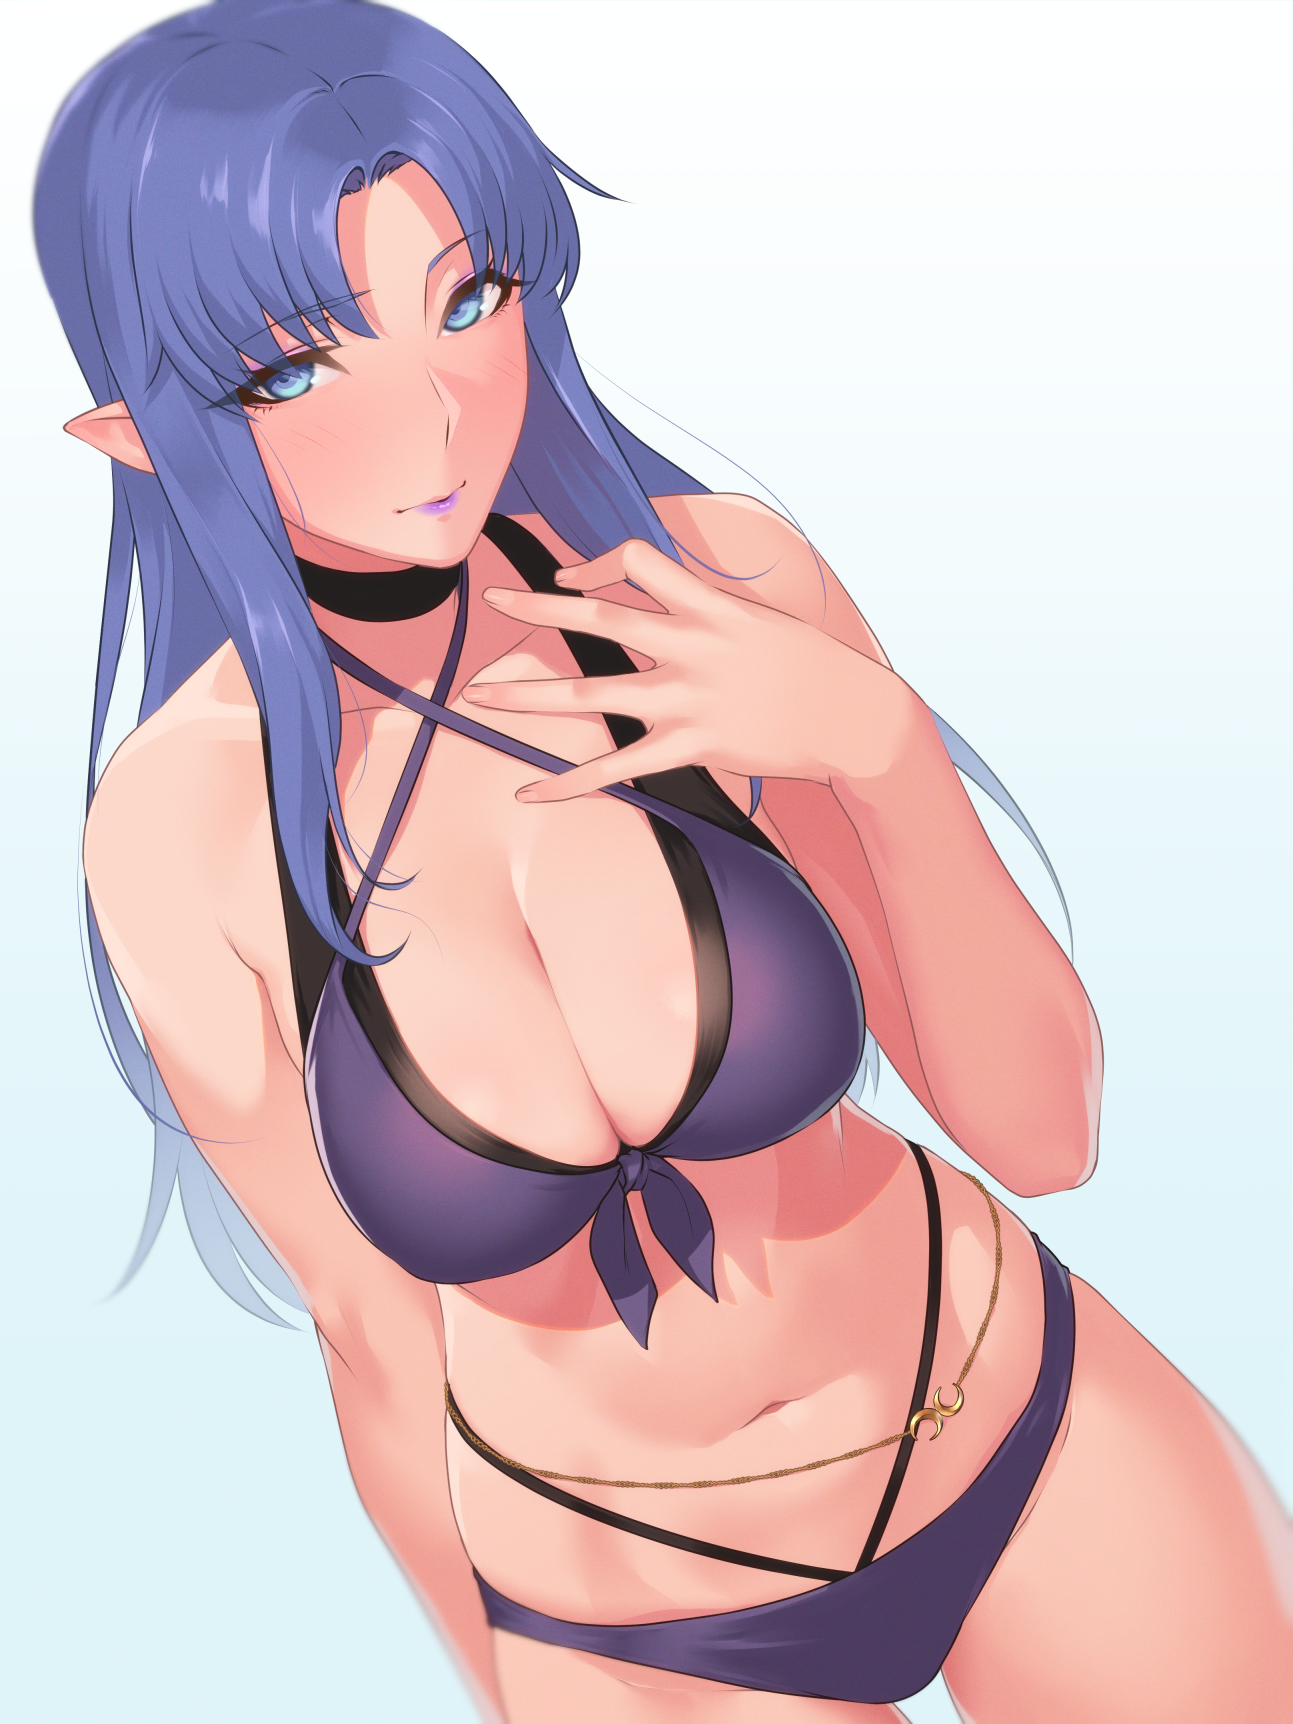 Anime 1293x1724 Fate/Stay Night: Unlimited Blade Works Fate/Stay Night Fate series mature women big boobs belly button thighs curvy bangs 2D Caster (Fate/Stay Night) Fate/Grand Order anime girls ecchi pointy ears anime portrait display fan art artwork Hikichi Sakuya